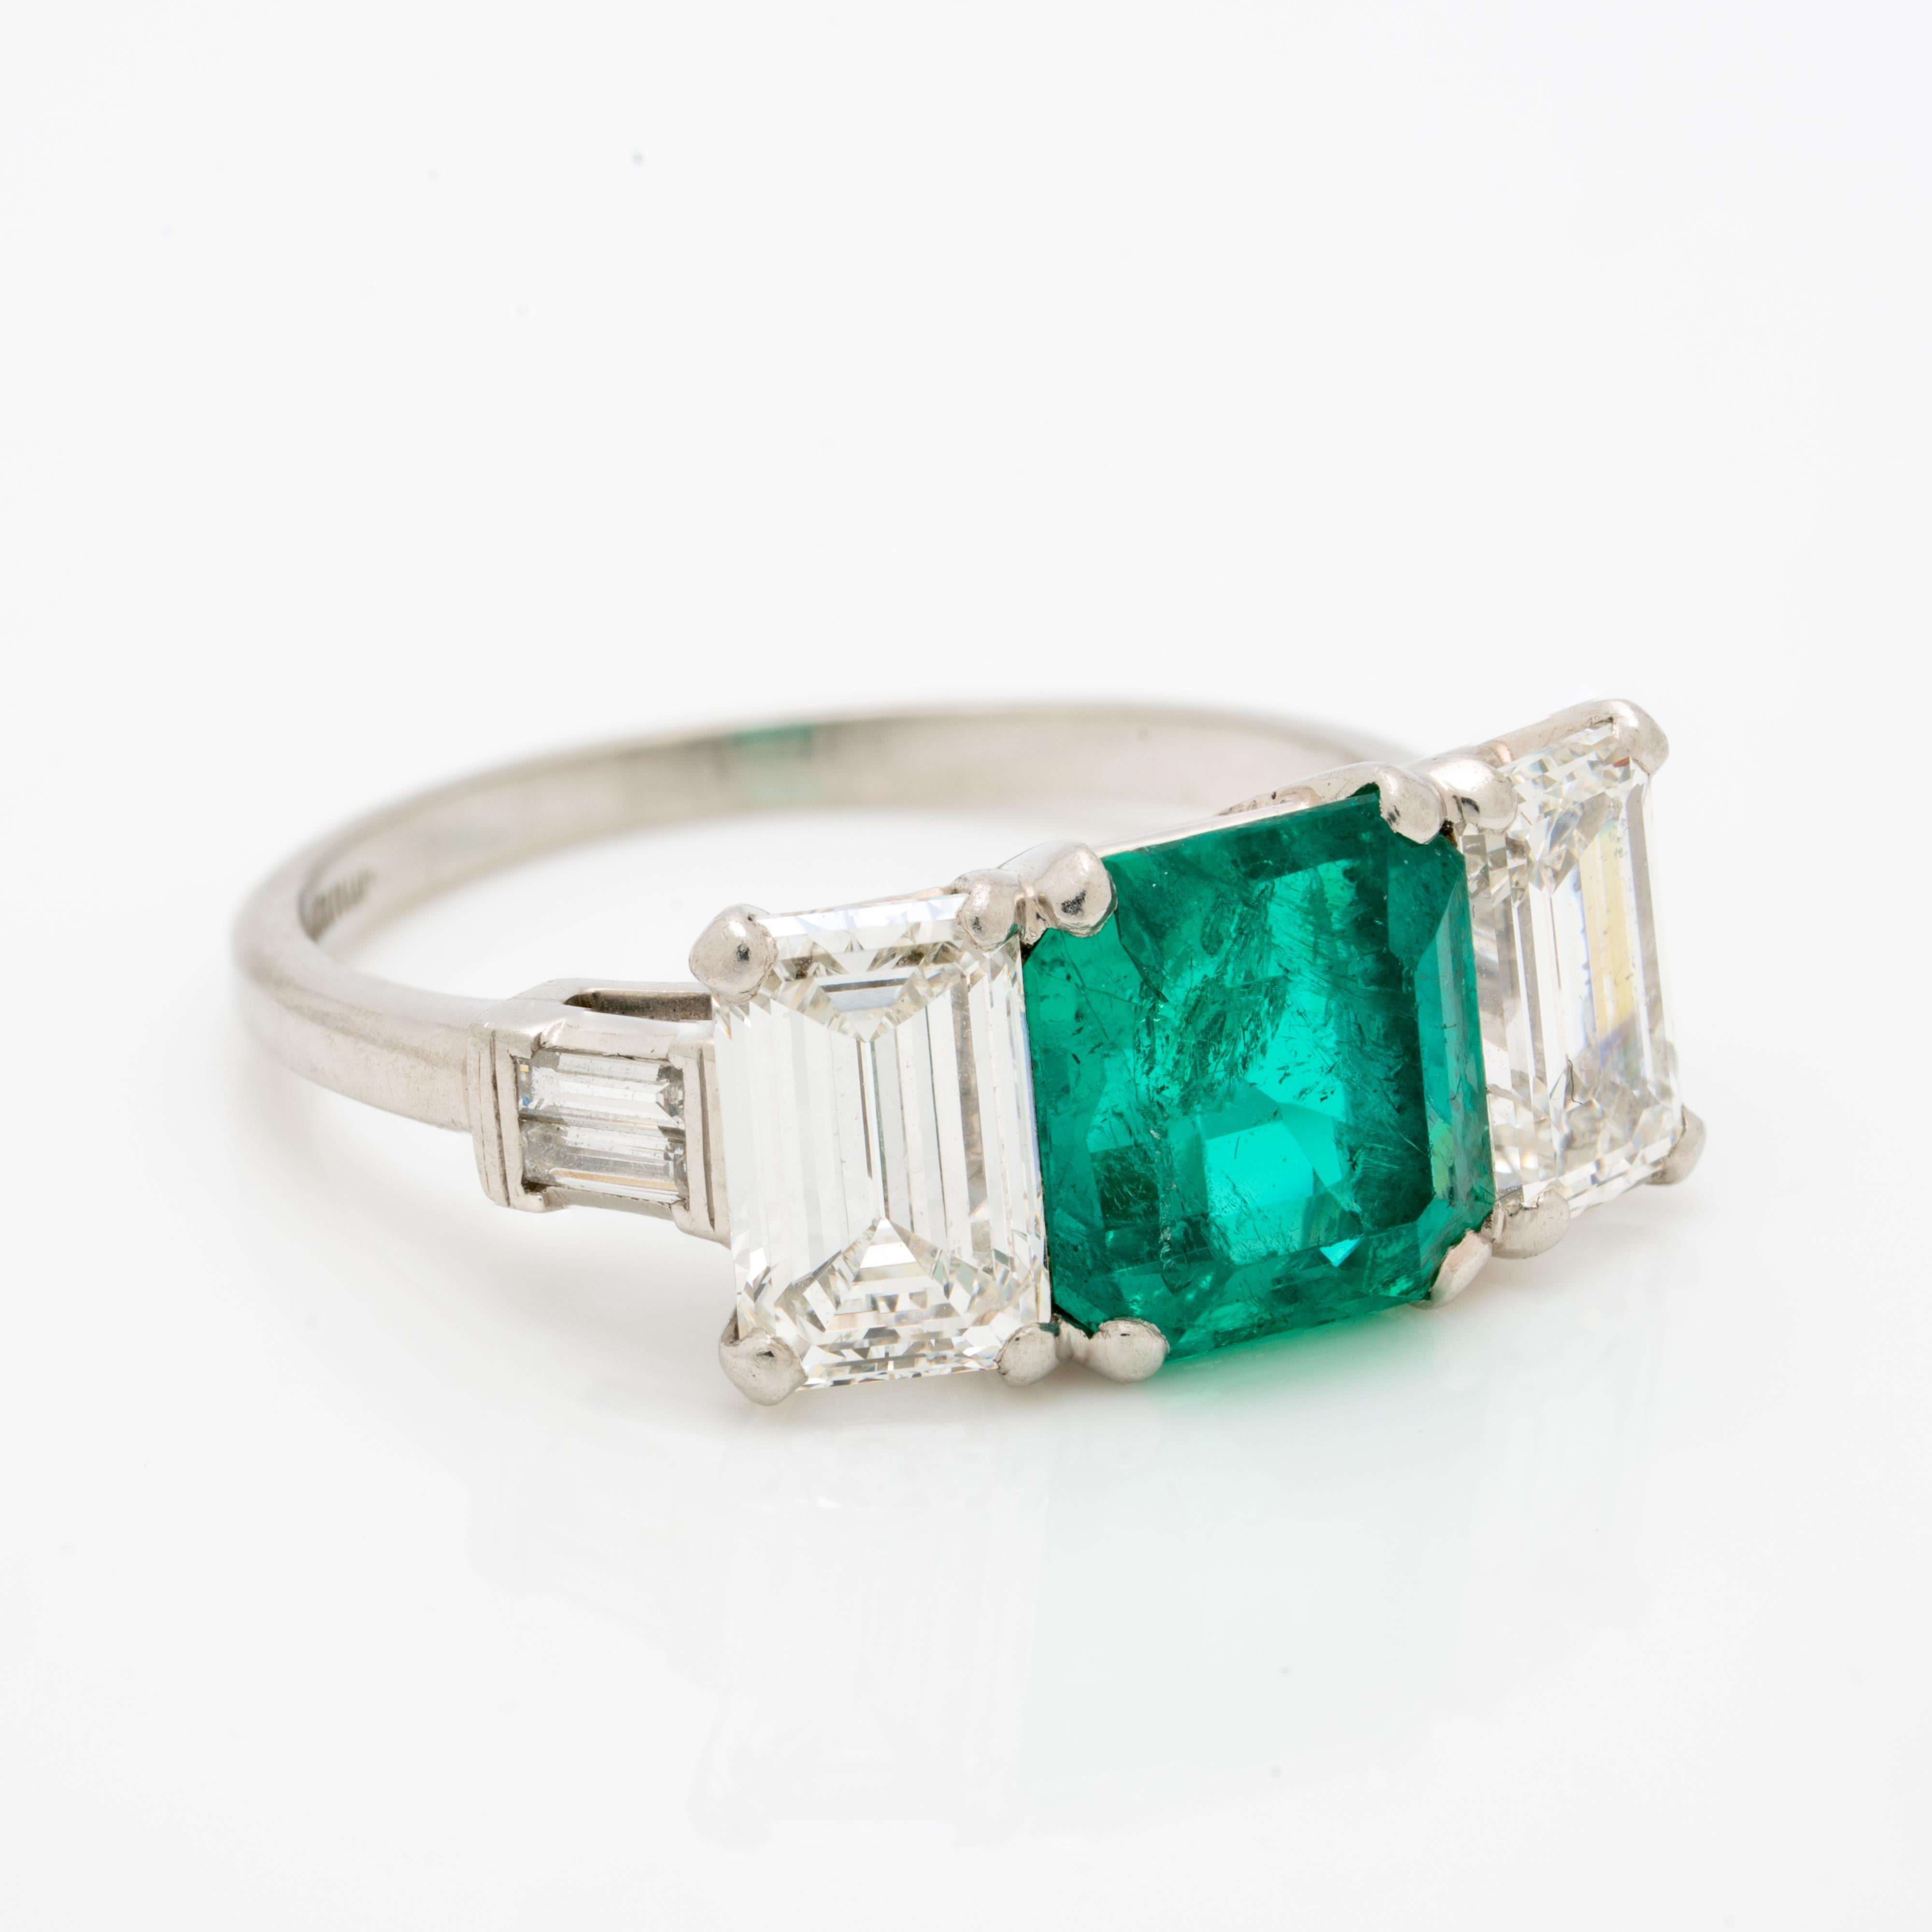 Vintage Platinum GIA certed 1.20ct Colombian Emerald RING w/ 1.0ct Emerald Cut Diamond Shoulders c.1950s

Period: Vintage
Year: c. 1950s
Material: Platinum, 1.20cts.Colombian Emerald and 1.10cts Emerald Cut and baguette cut Diamonds
Size: 7
Weight: